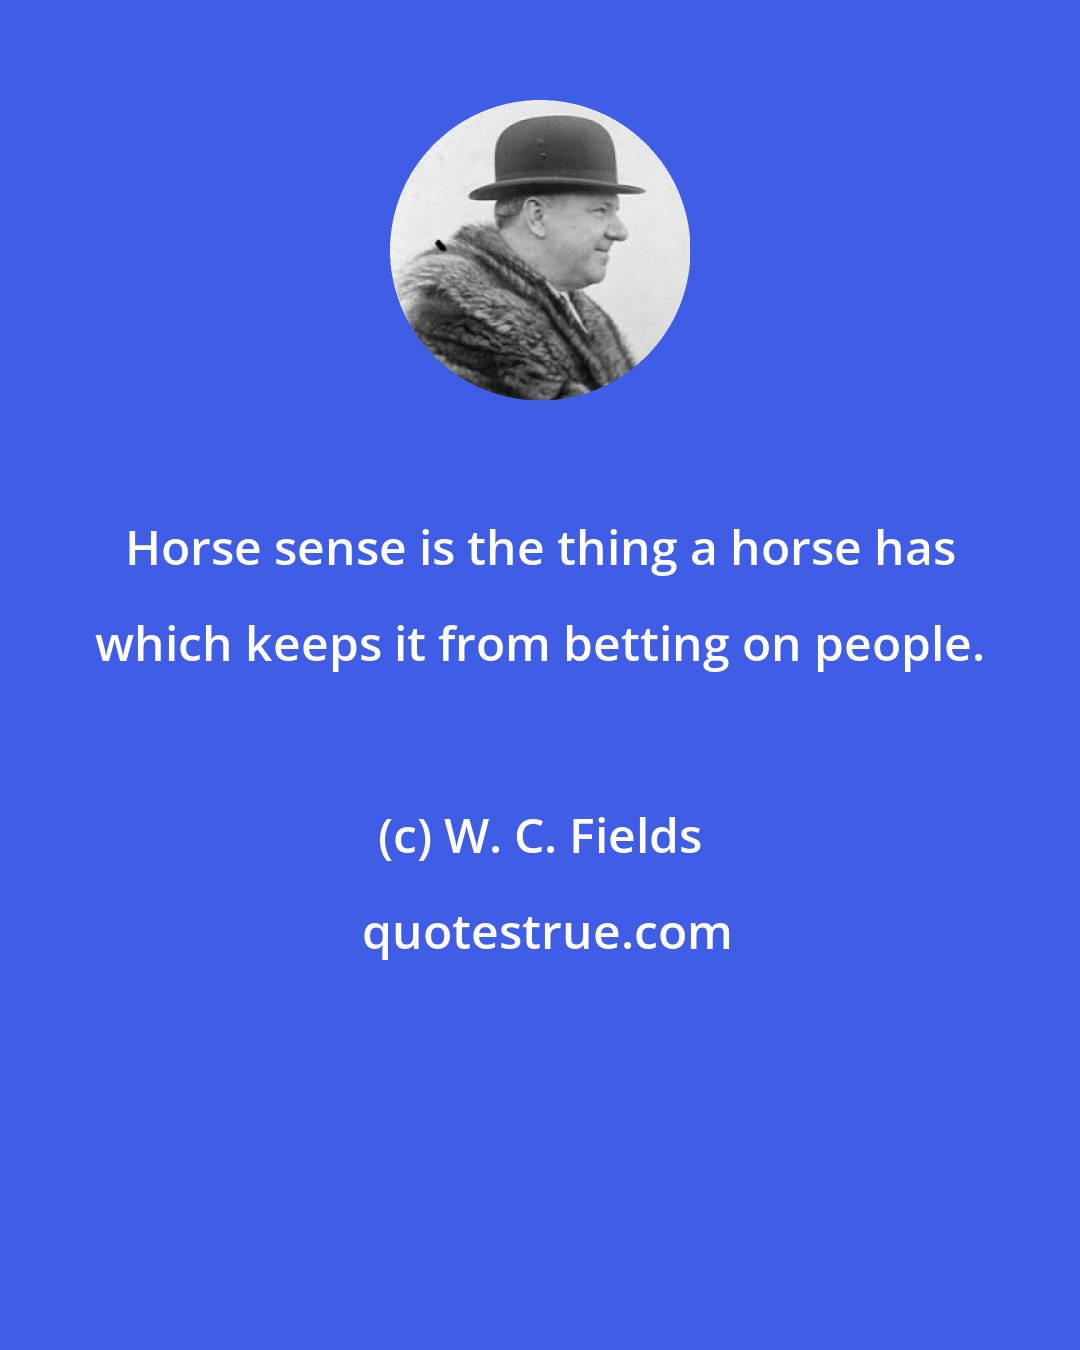 W. C. Fields: Horse sense is the thing a horse has which keeps it from betting on people.